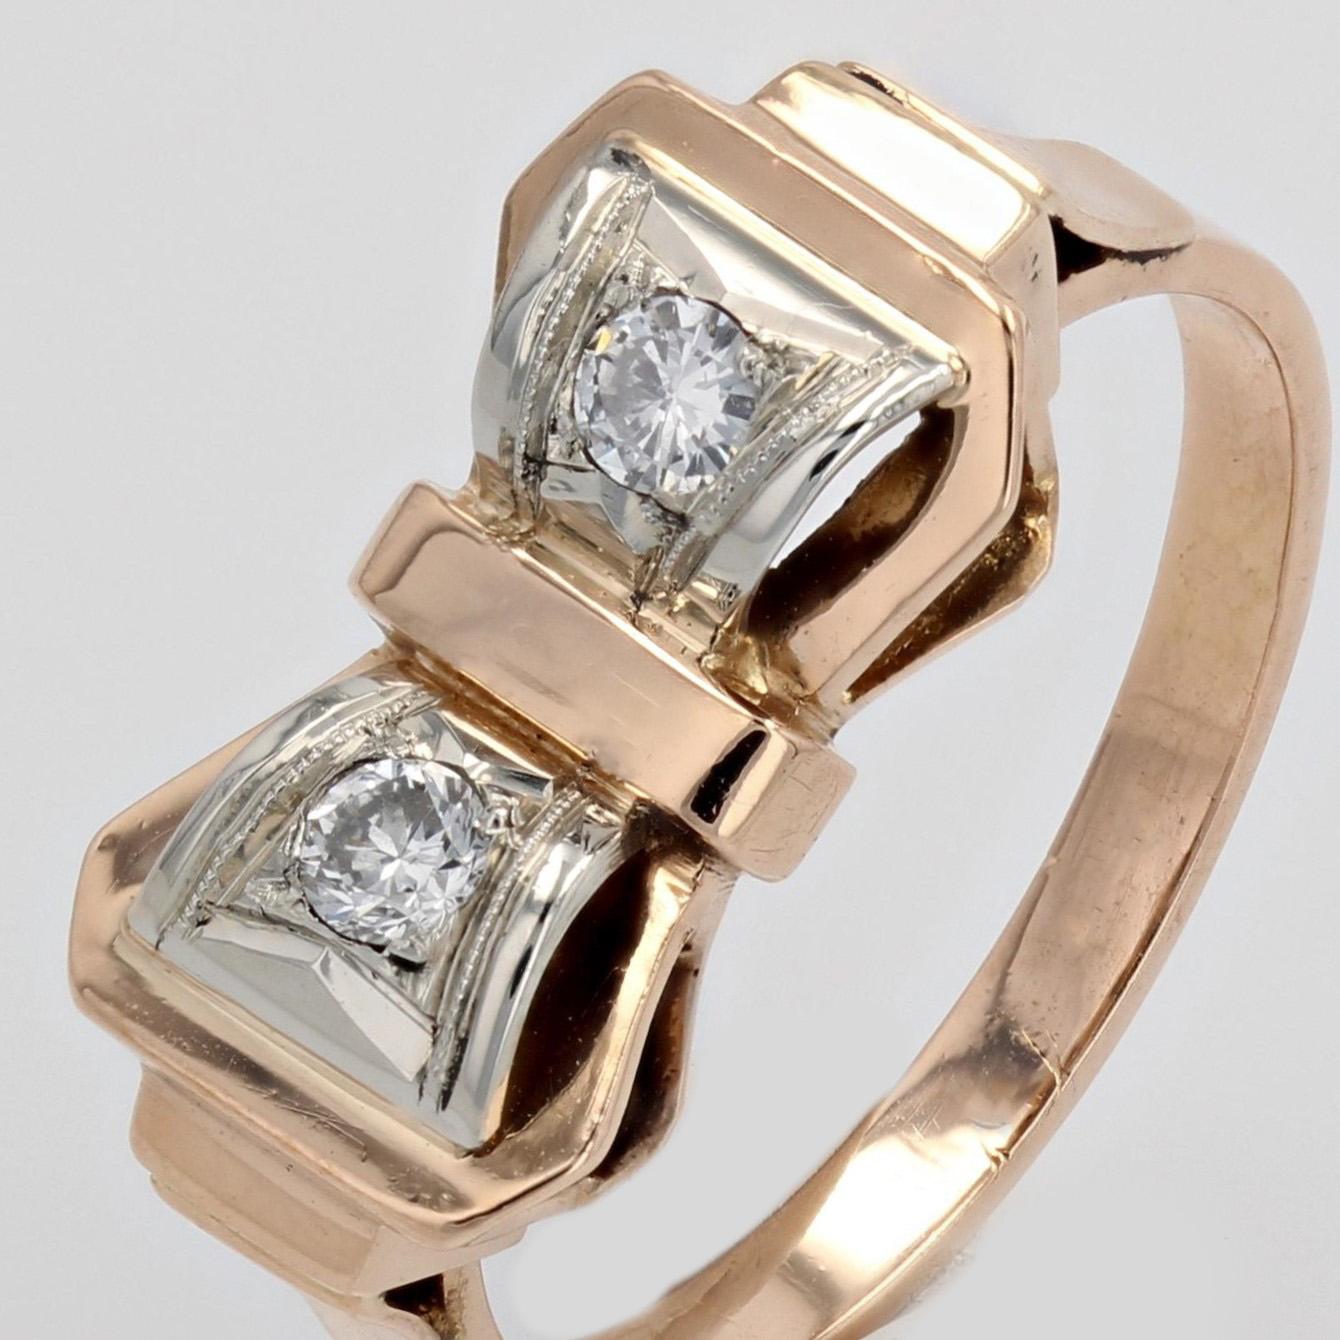 French 1950s Diamonds 18 Karat Rose Gold Knot Tank Ring For Sale 3